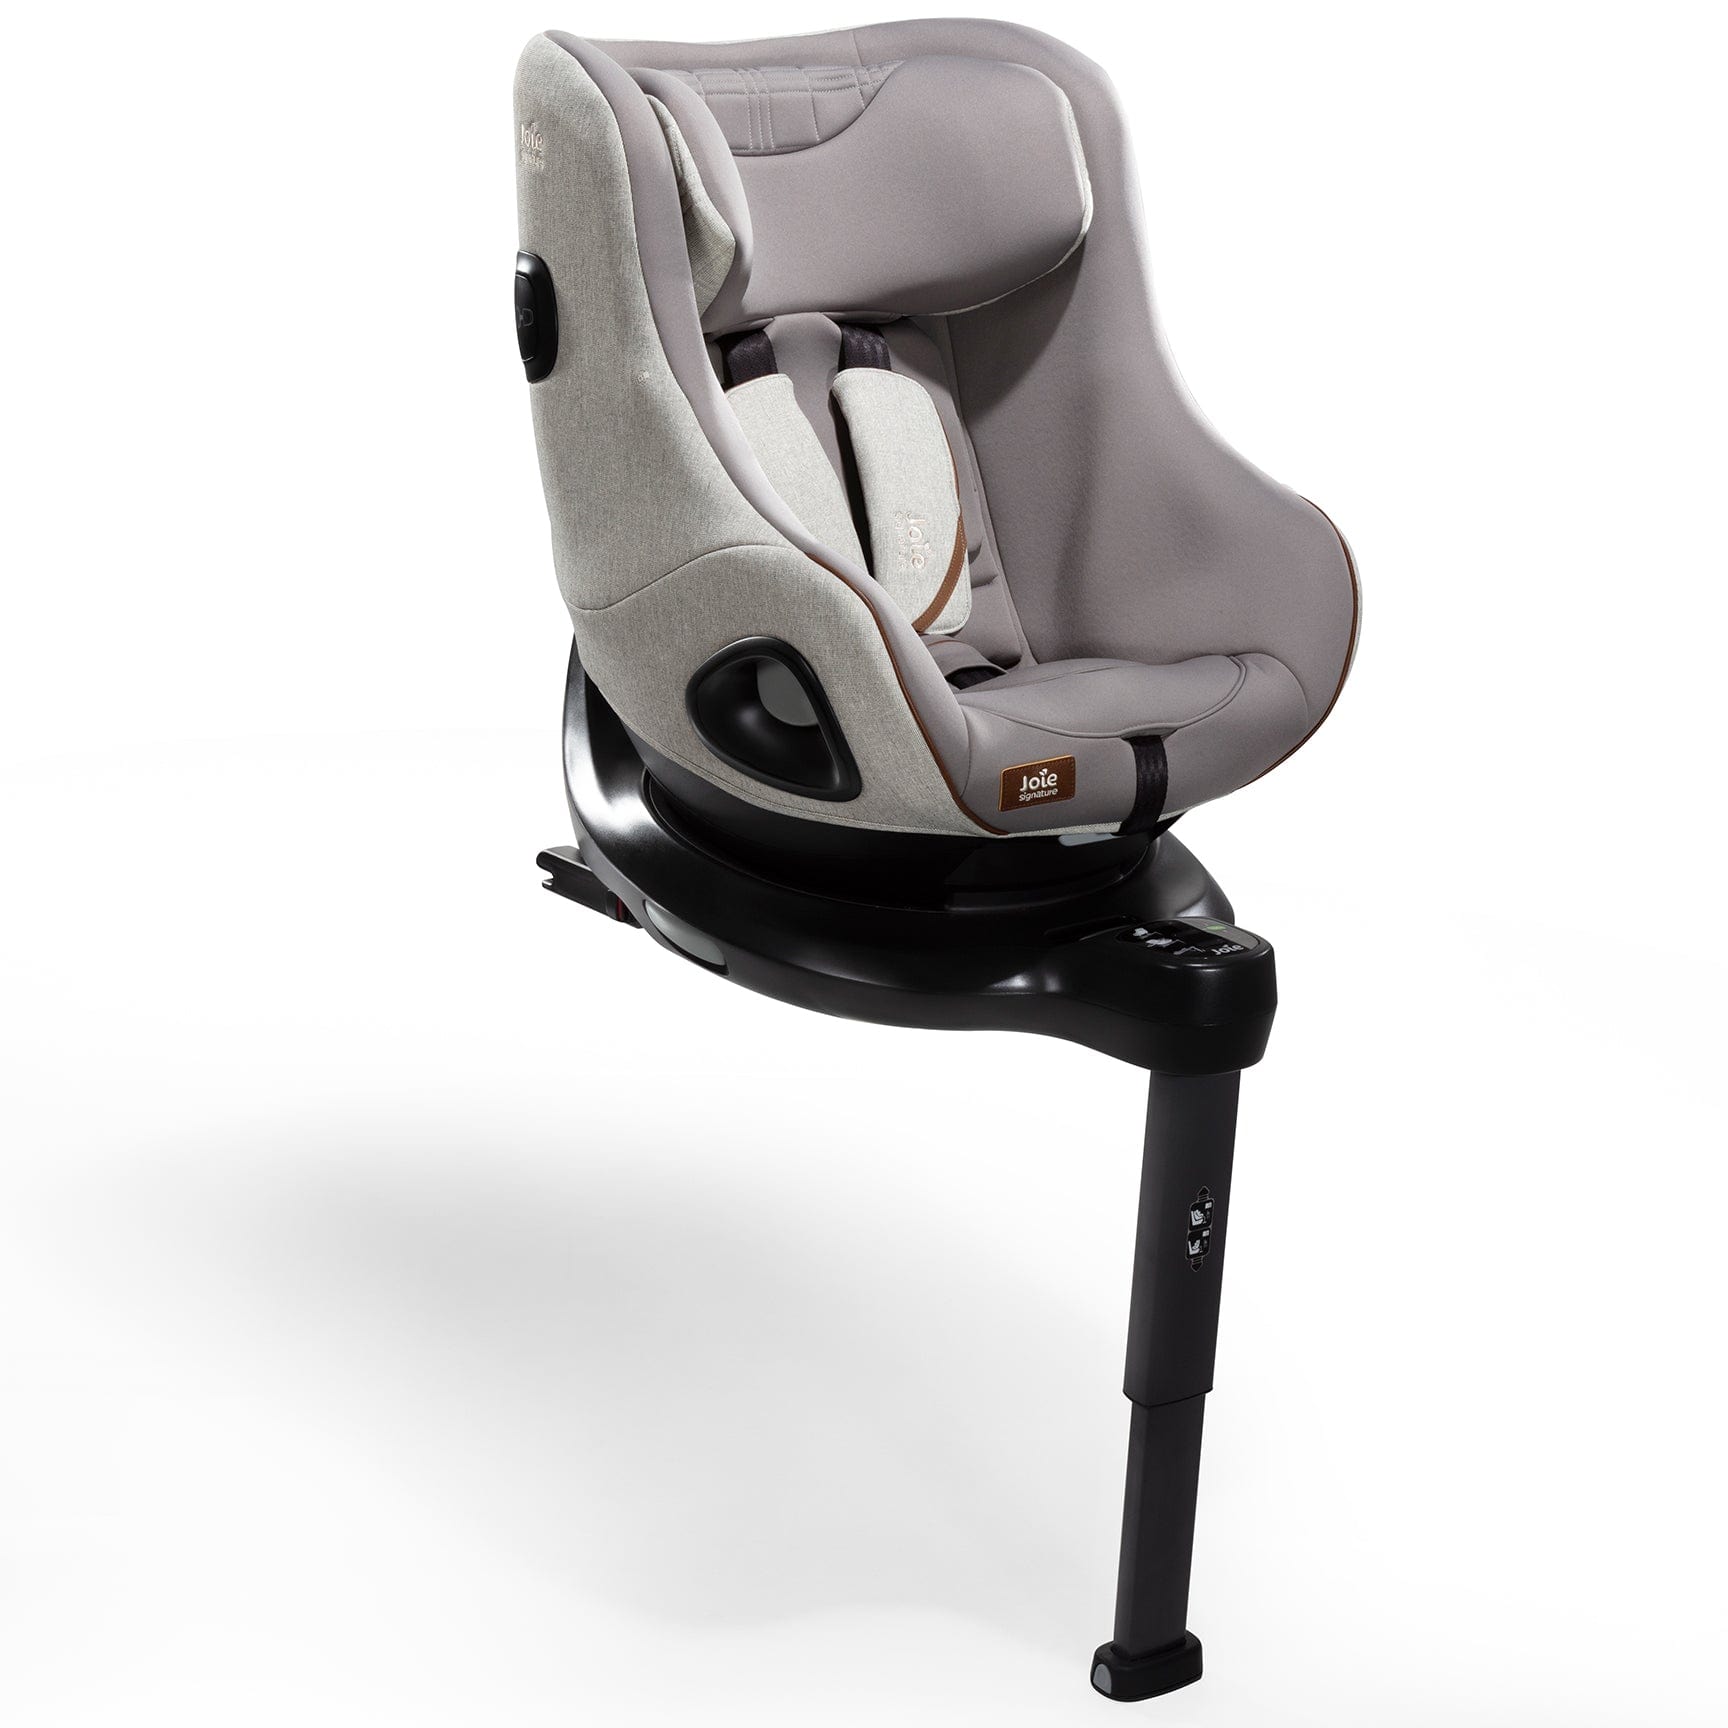 Joie i-Harbour in Oyster Swivel Car Seats C214AAOYS000 5056080612461